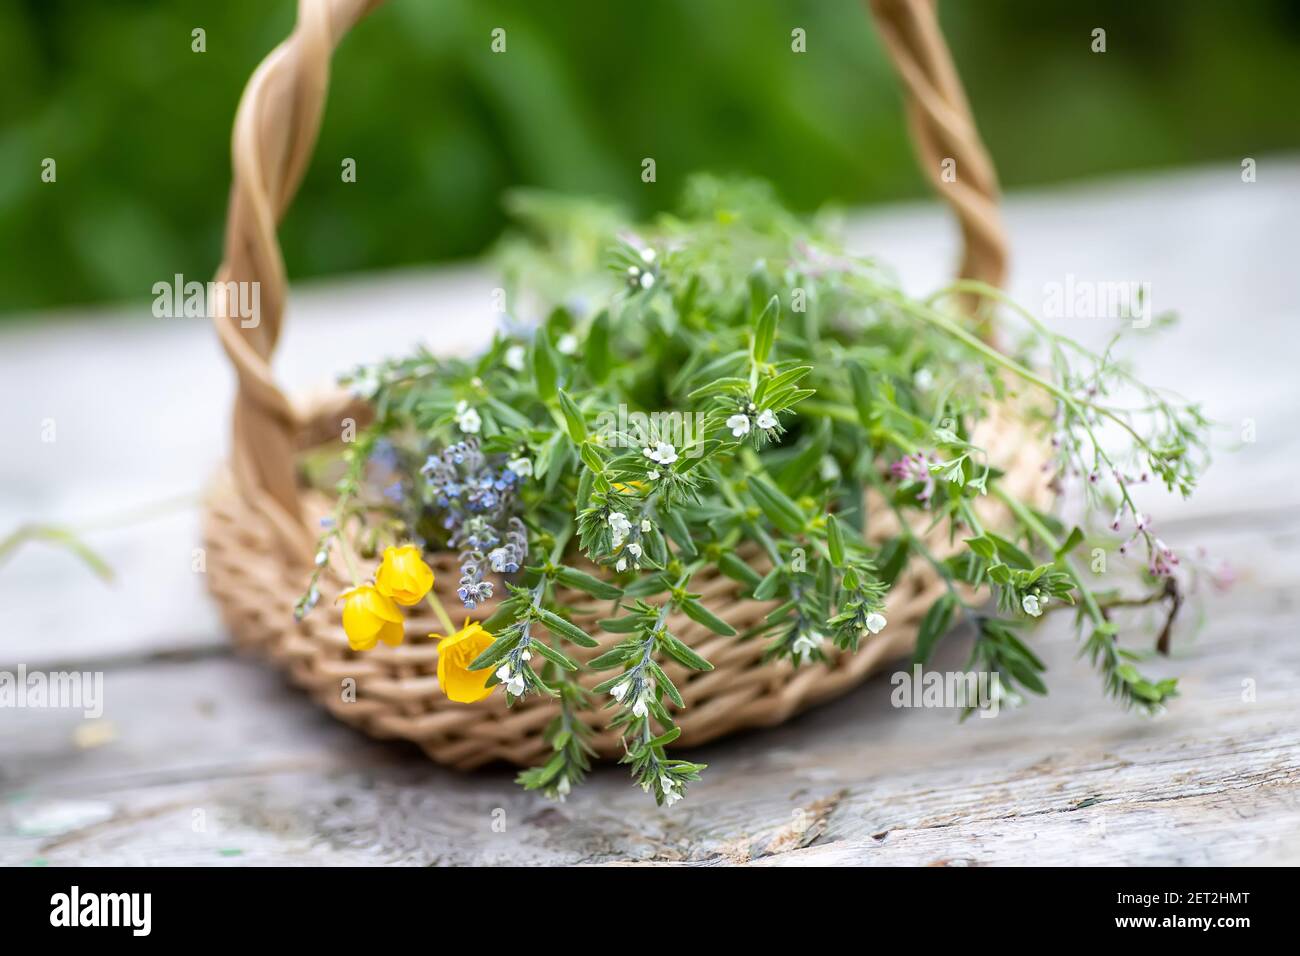 bouquet of medicinal plants in basket on a wooden table. Fumaria officinalis, Myosotis stricta, Ranunculus repens collected for preparation of potions Stock Photo